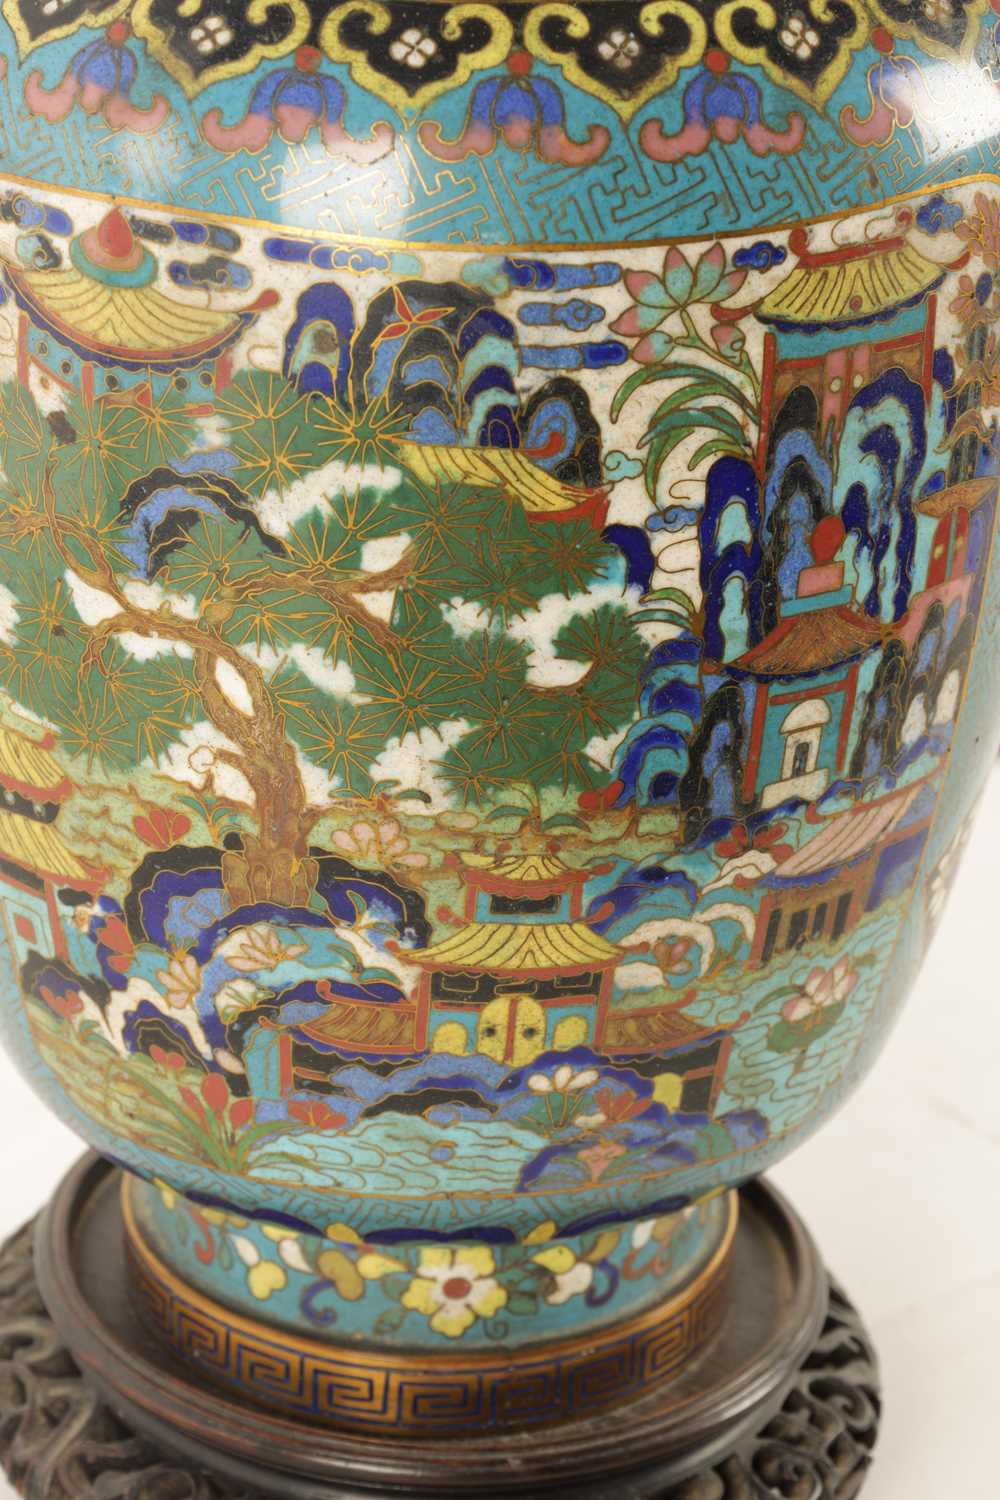 A LATE 19TH/EARLY 20TH CENTURY CENTURY CHINESE CLOISONNE VASE LAMP - Image 9 of 34